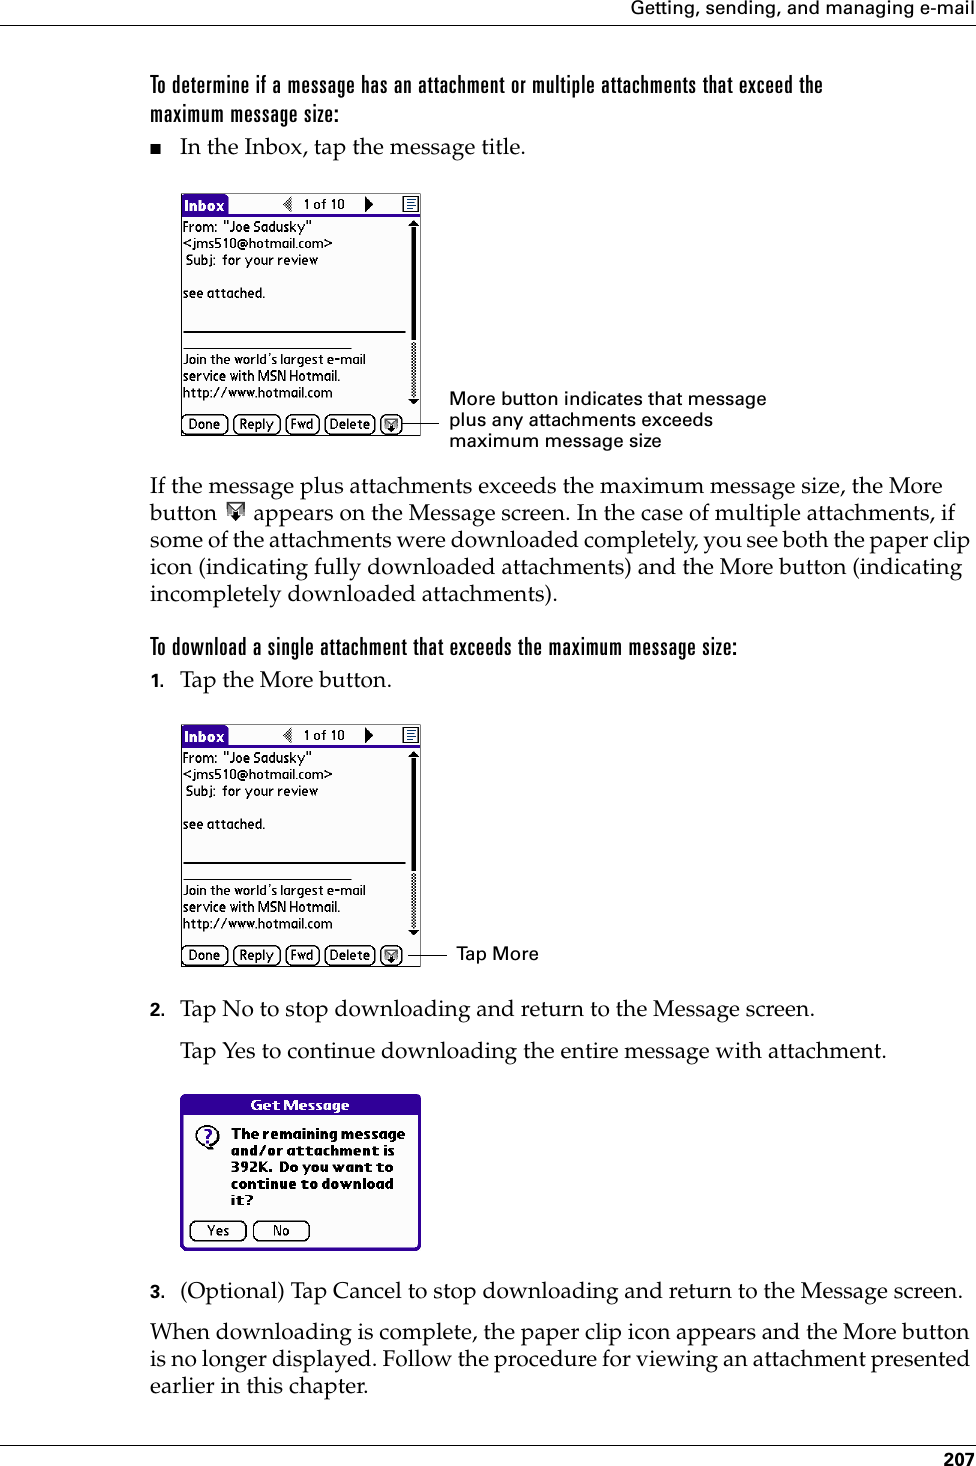 Getting, sending, and managing e-mail207To determine if a message has an attachment or multiple attachments that exceed the maximum message size:■In the Inbox, tap the message title.If the message plus attachments exceeds the maximum message size, the More button   appears on the Message screen. In the case of multiple attachments, if some of the attachments were downloaded completely, you see both the paper clip icon (indicating fully downloaded attachments) and the More button (indicating incompletely downloaded attachments).To download a single attachment that exceeds the maximum message size:1. Tap the More button. 2. Tap No to stop downloading and return to the Message screen.Tap Yes to continue downloading the entire message with attachment. 3. (Optional) Tap Cancel to stop downloading and return to the Message screen.When downloading is complete, the paper clip icon appears and the More button is no longer displayed. Follow the procedure for viewing an attachment presented earlier in this chapter.More button indicates that message plus any attachments exceeds maximum message sizeTa p  M o r ePalm, Inc. Confidential